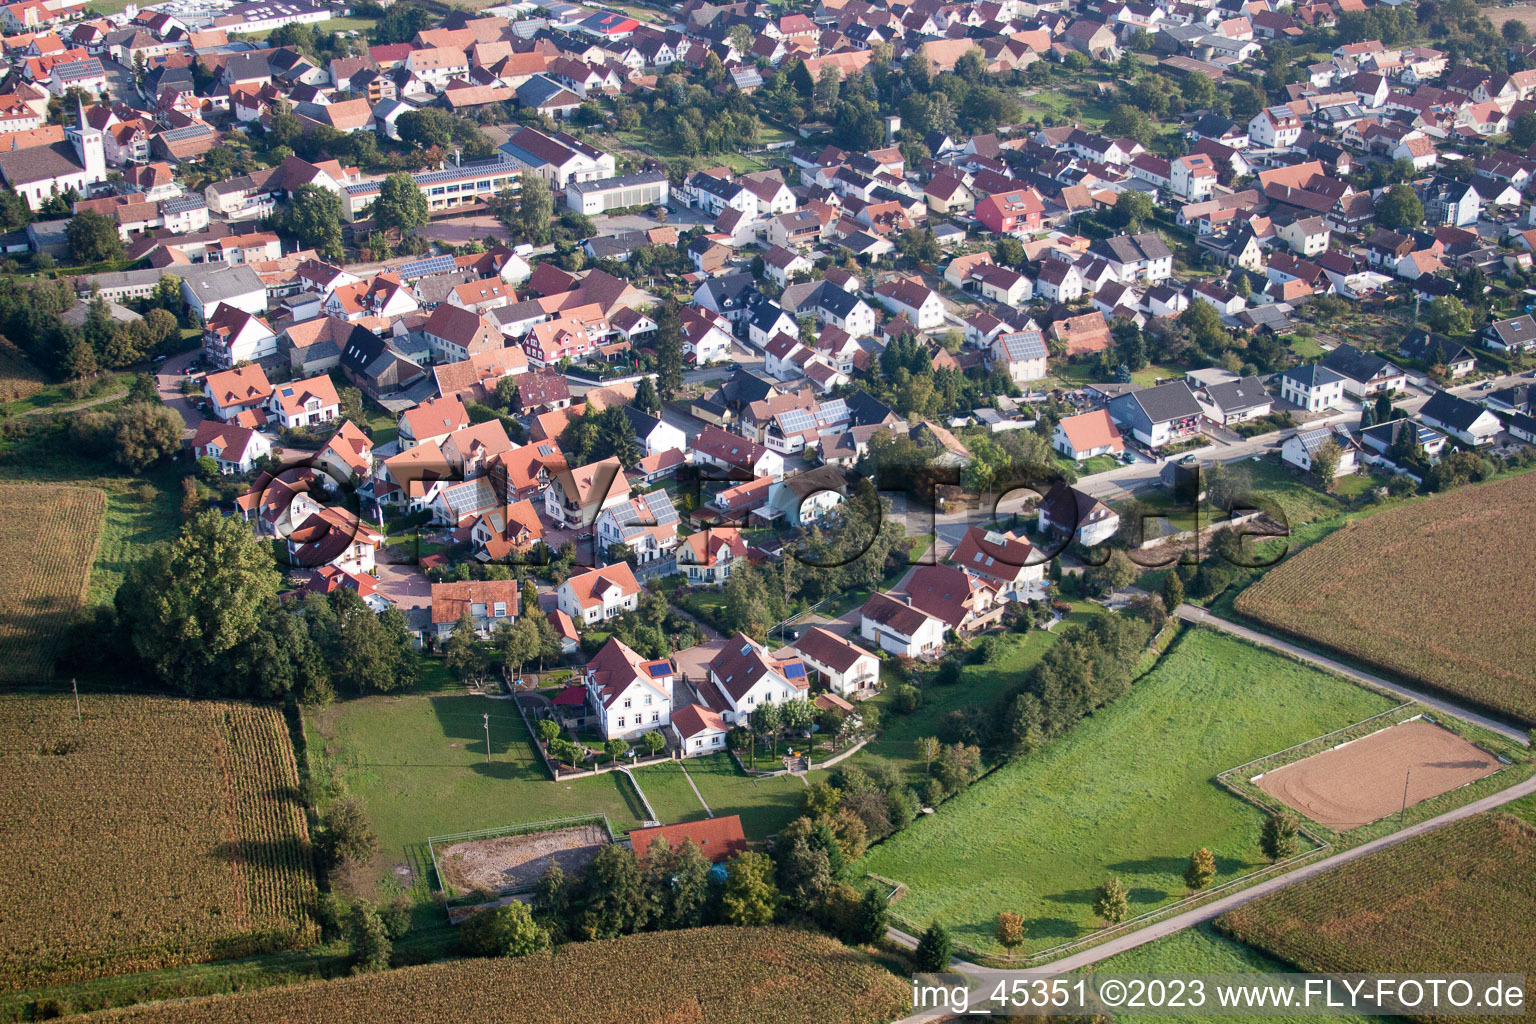 Minfeld in the state Rhineland-Palatinate, Germany seen from above